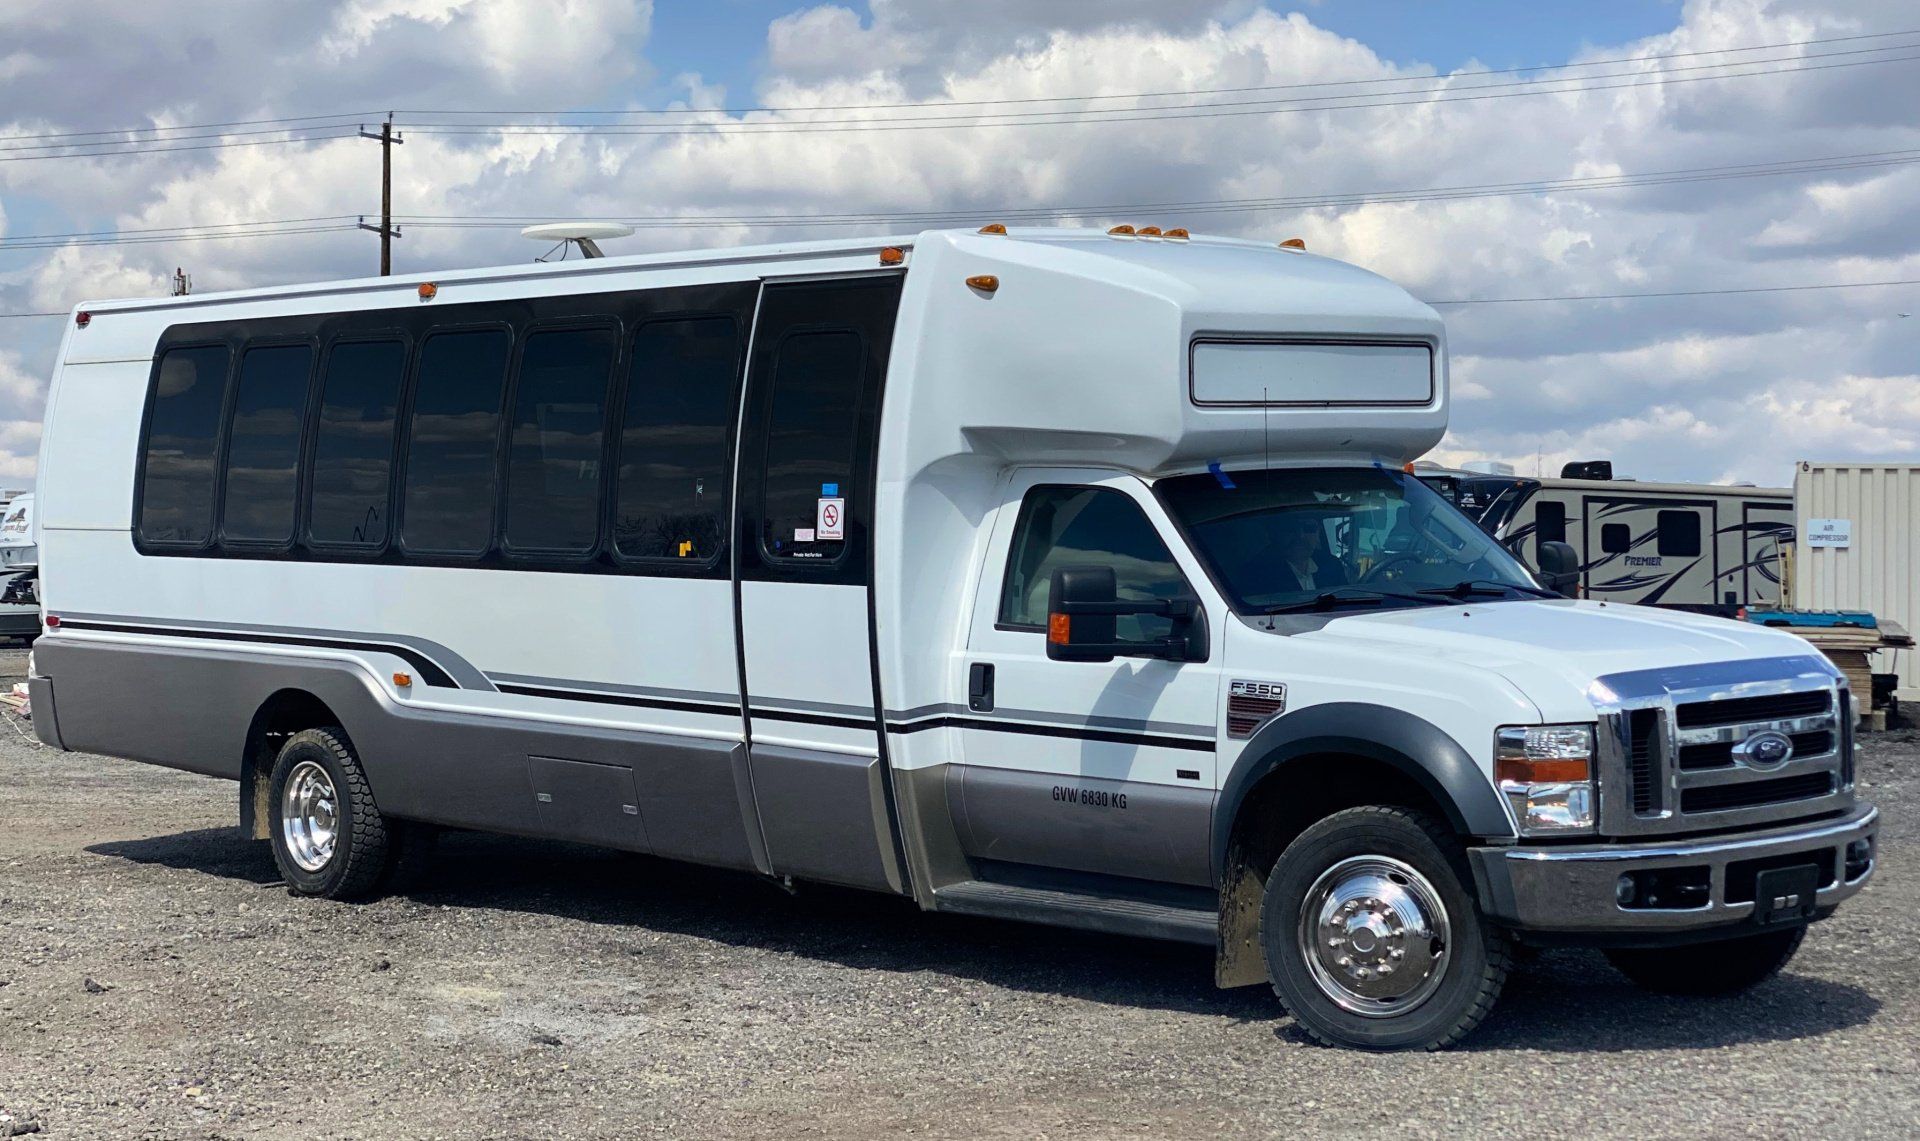 Limo To Go Krystal Coach 24 passenger white party bus exterior side view